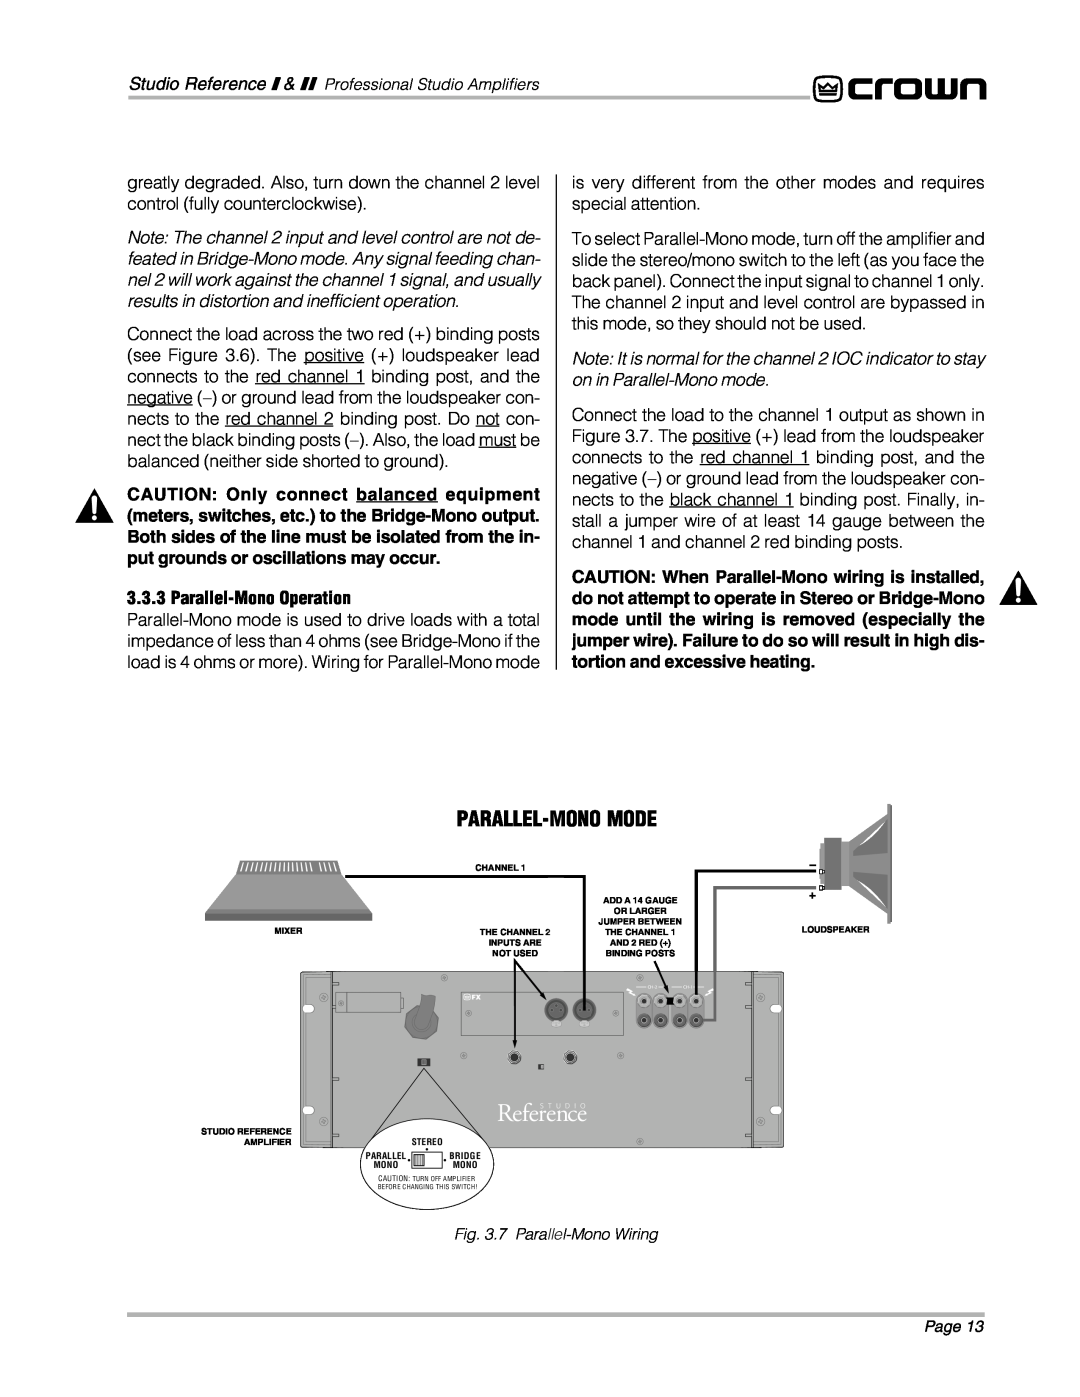 Crown Audio STUDIO AMPLIFIER owner manual results in distortion and inefficient operation, on in Parallel-Monomode 